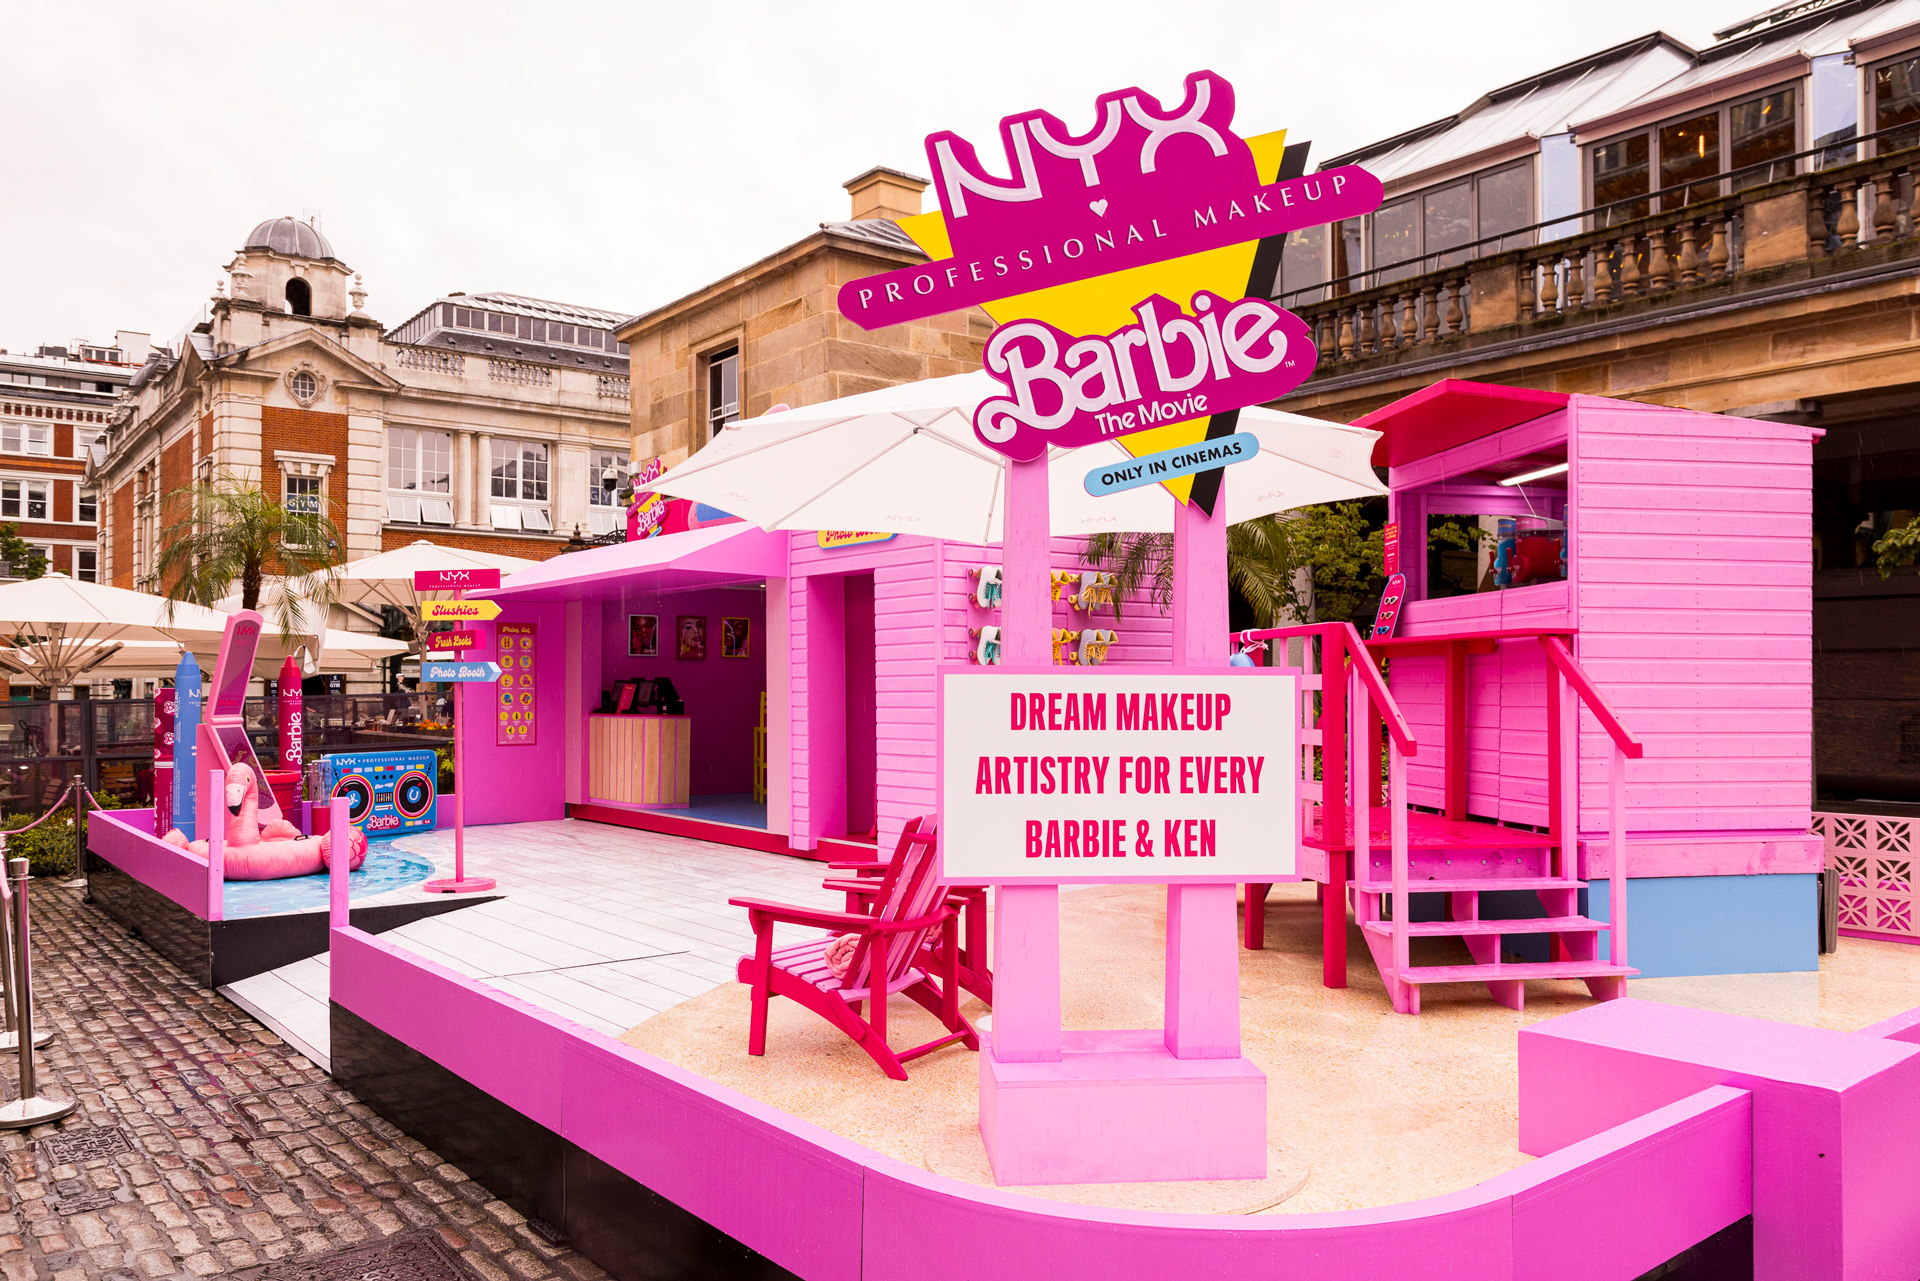 themed popup for Barbie and makeup brand